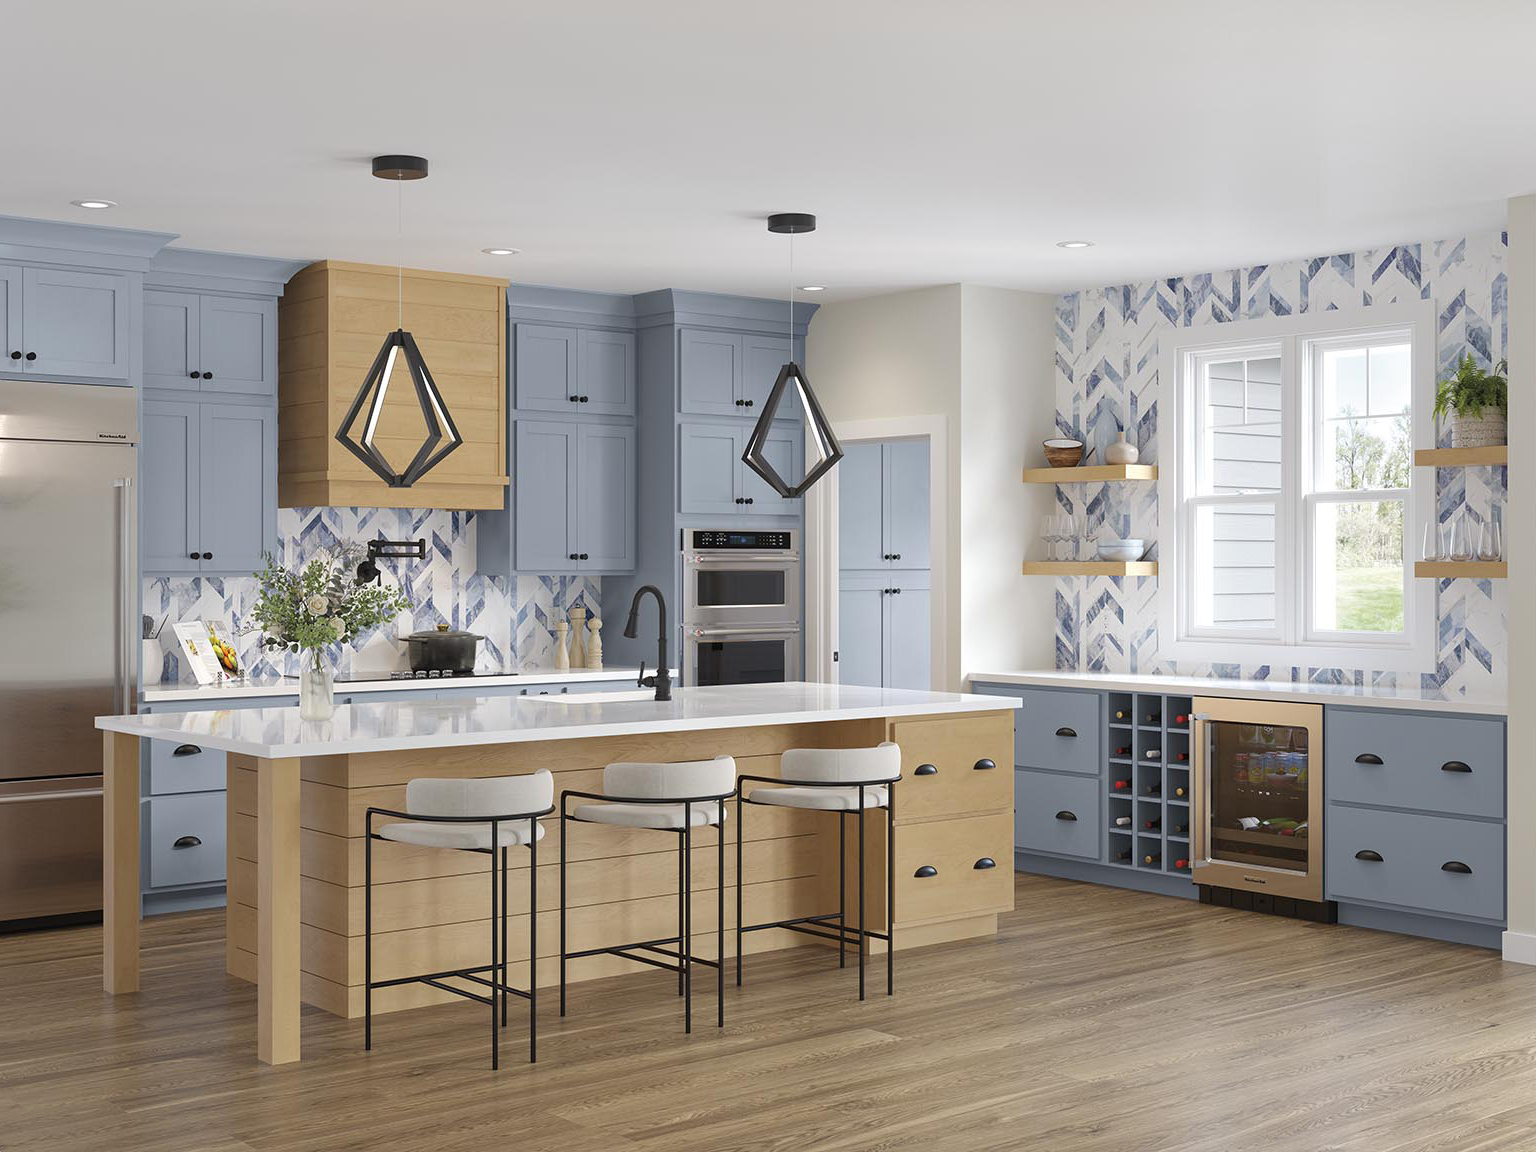 10 Specialty Kitchen Cabinets and Accessories For Home Remodeling